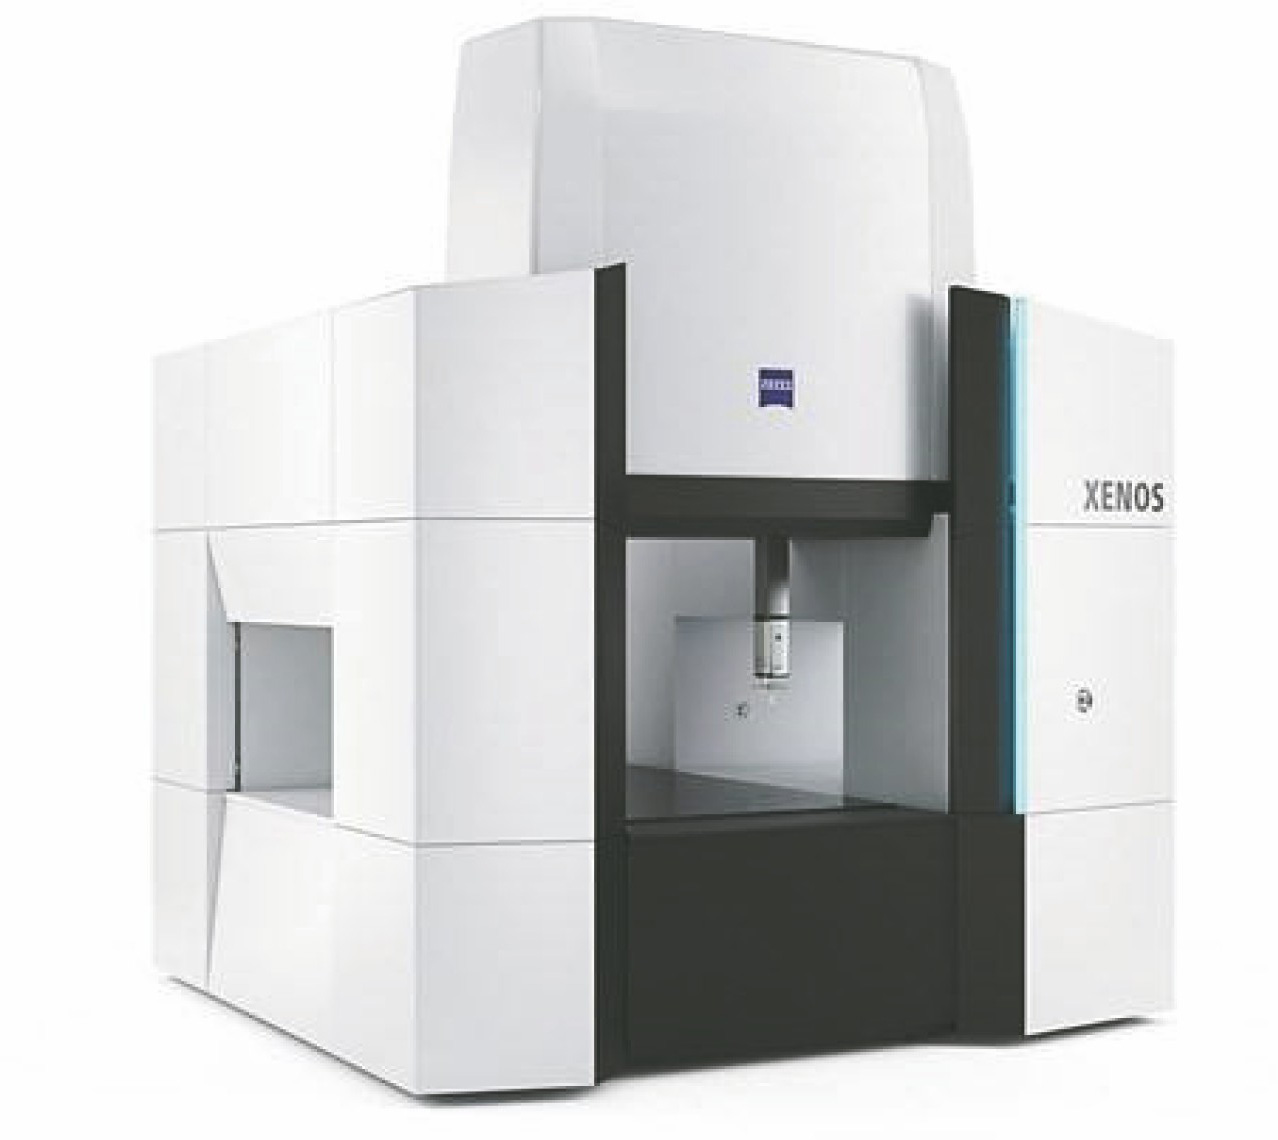 ZEISS XENOS commercial CMM system[23]